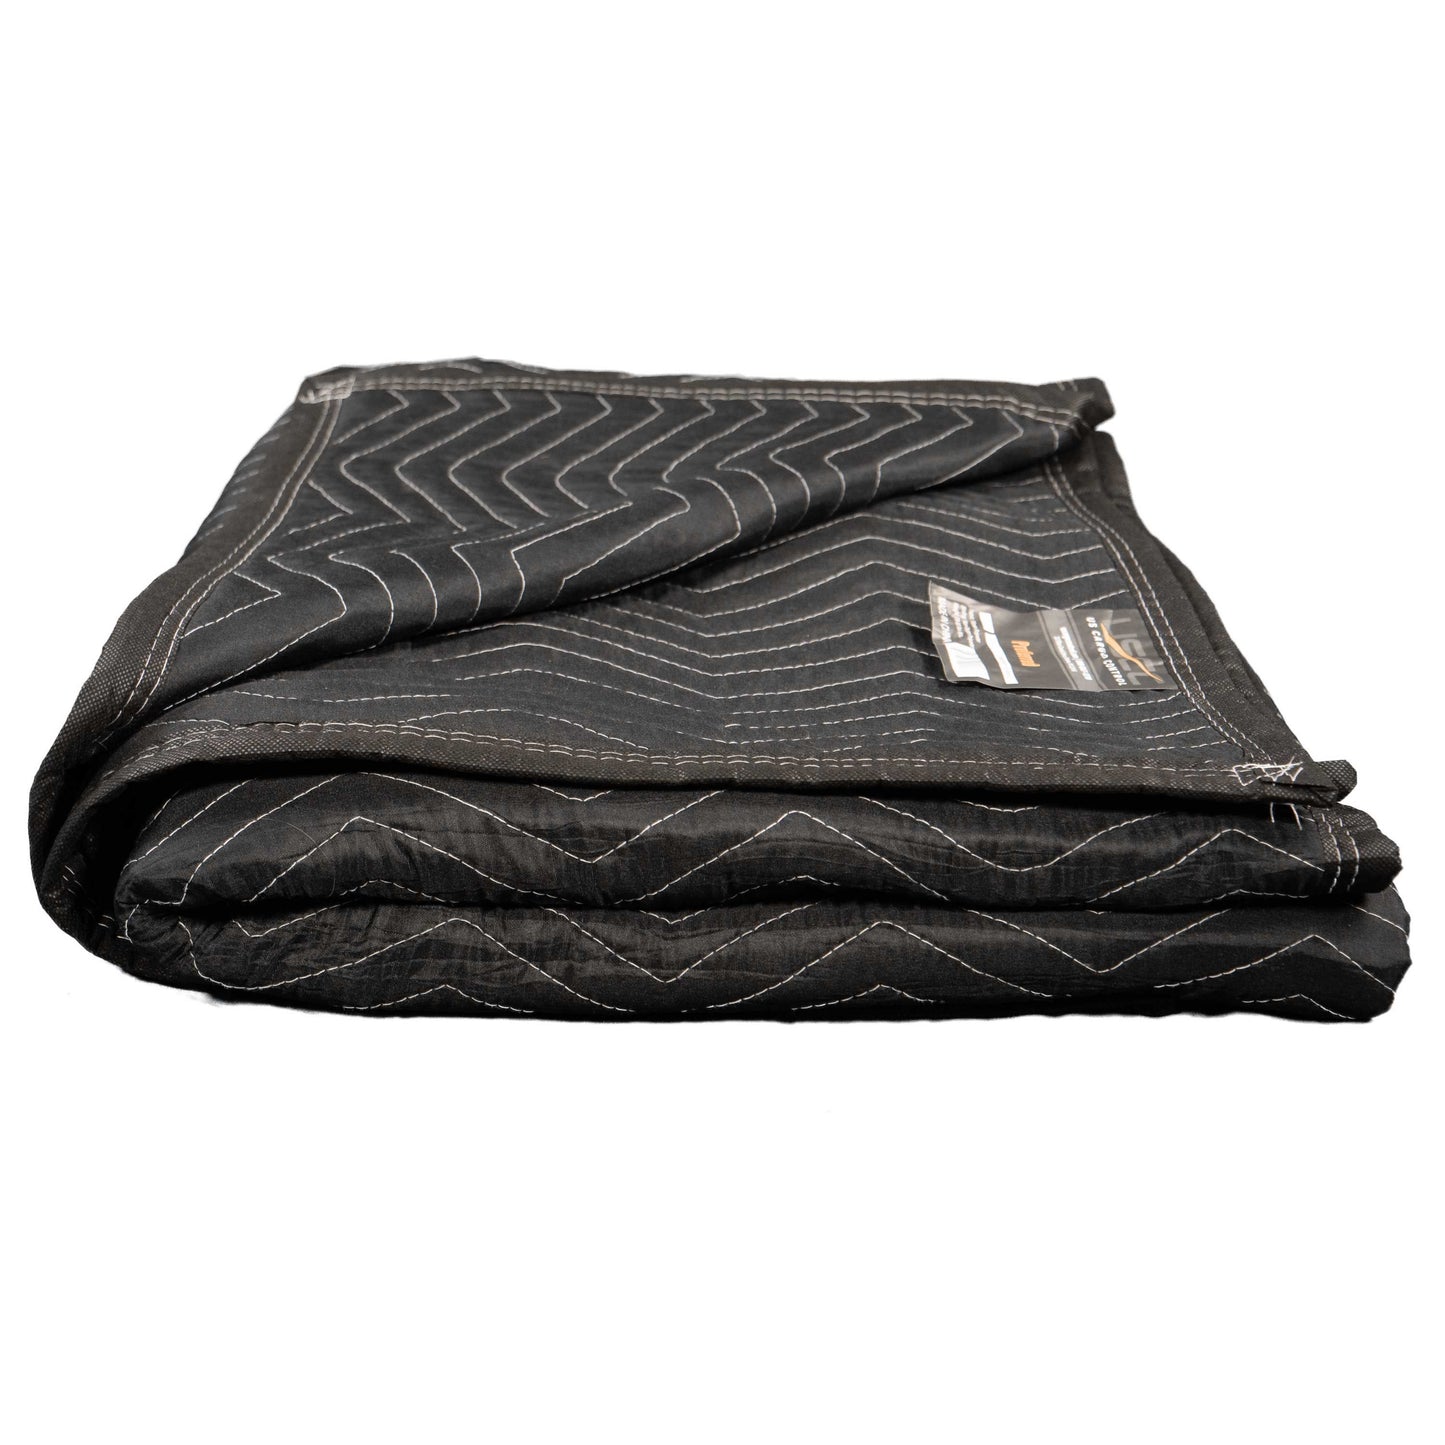 Moving Blankets - Preferred Mover Single Pack - 78-80 lbs/dozen image 1 of 11